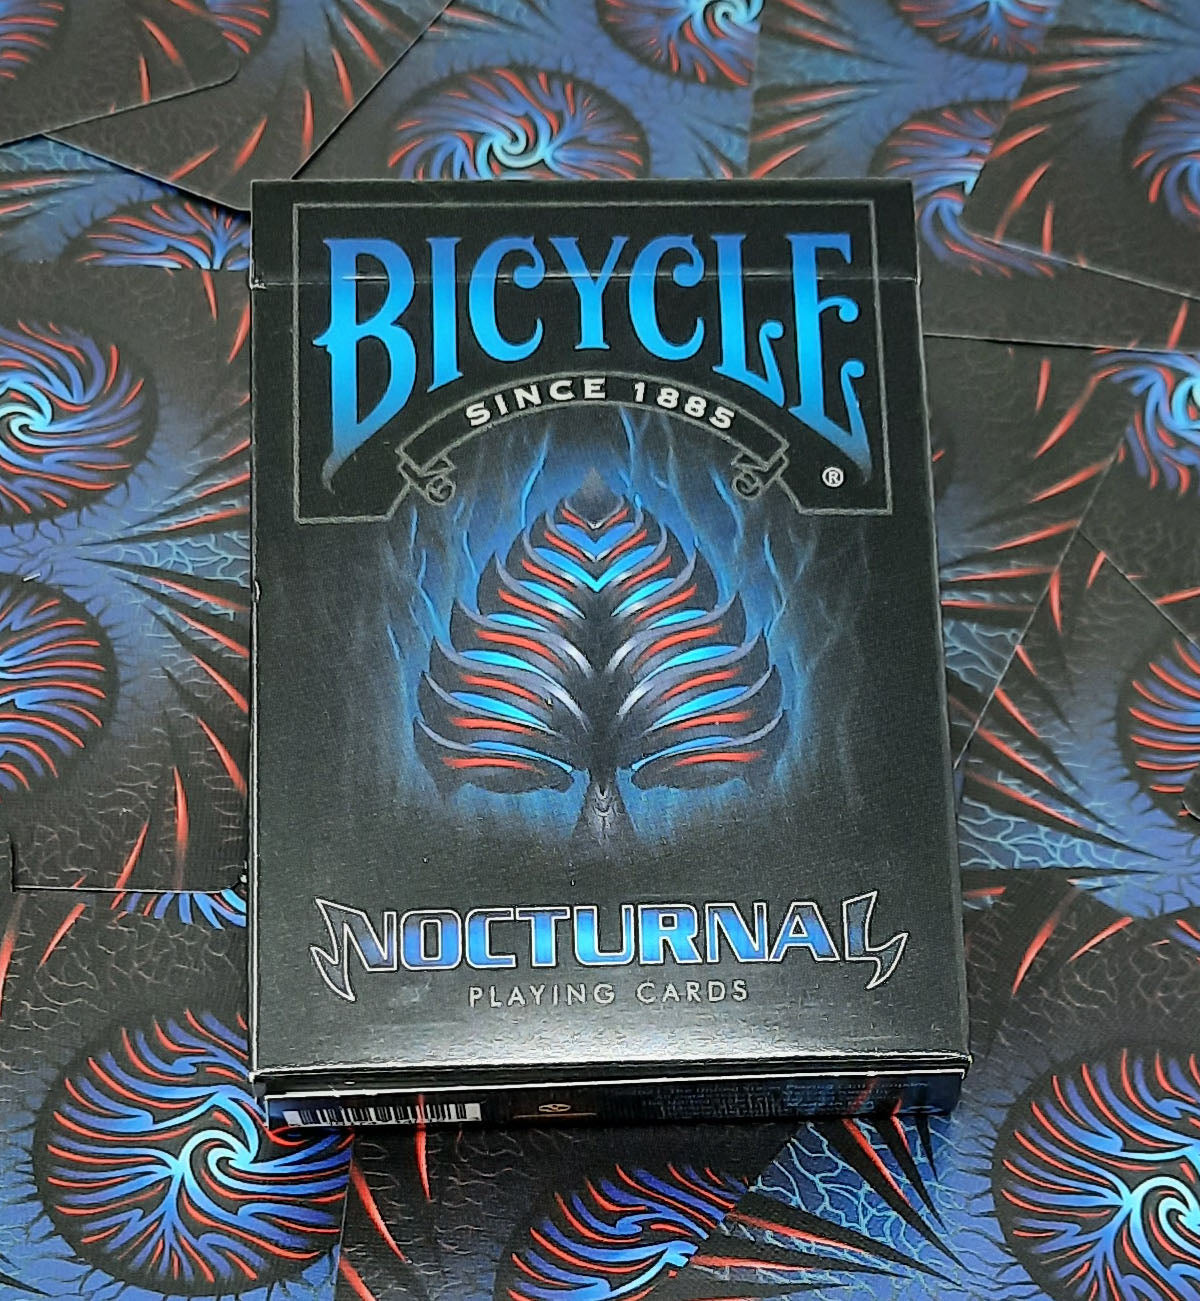 Bicycle Nocturnal (Special Limited Print Run) Playing Cards by Collectable Playing Cards